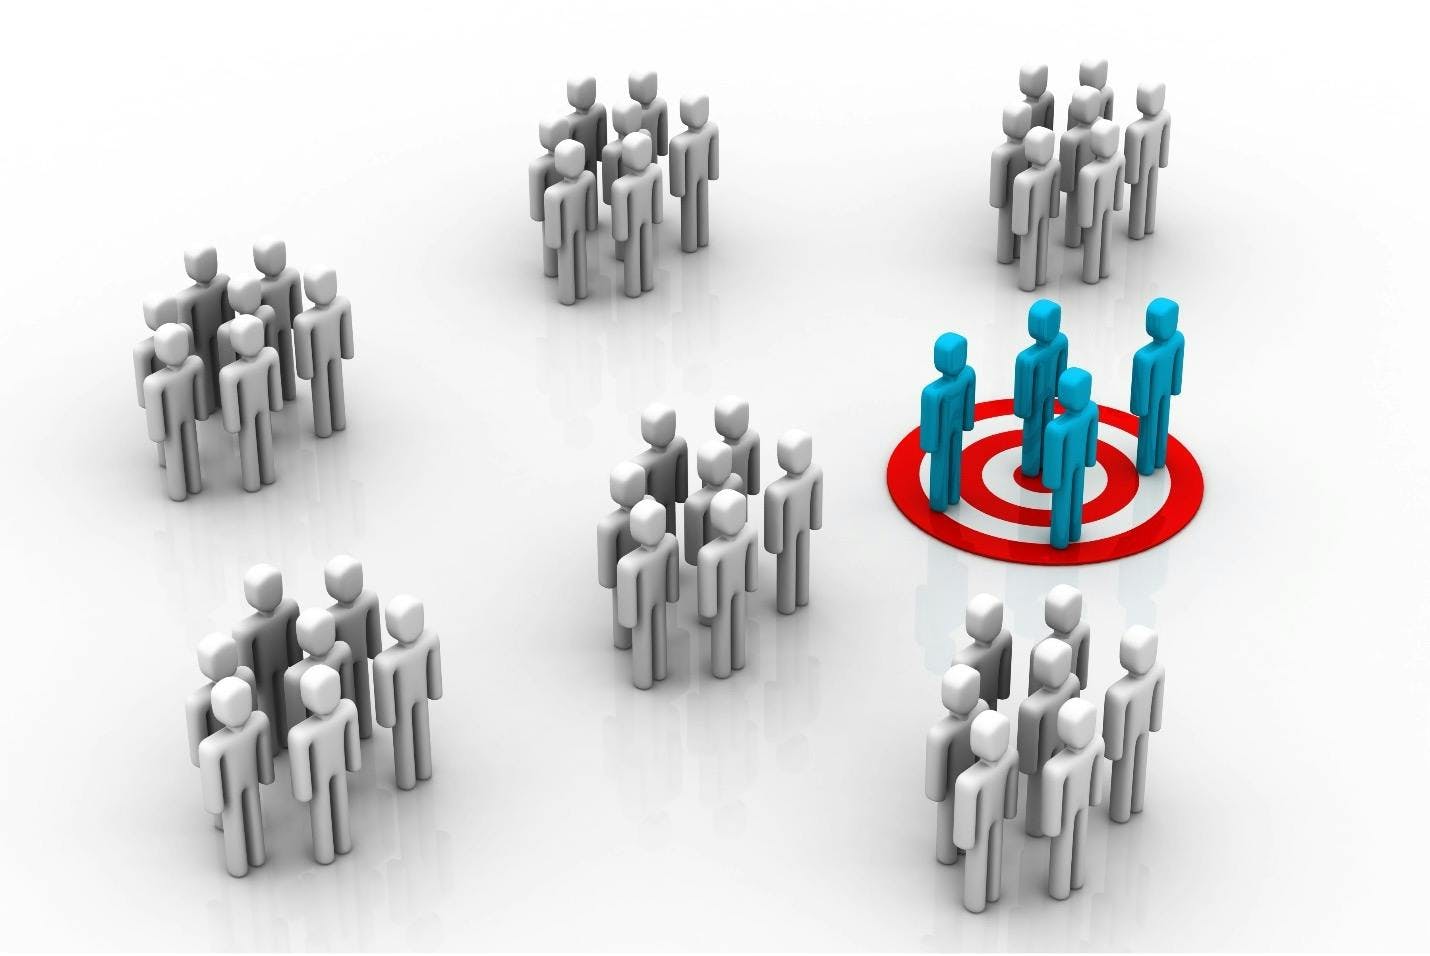 Seven clusters of people grouped together with one of those groups standing over a bullseye, signalling that this cluster of people represents your ideal type of customer. 